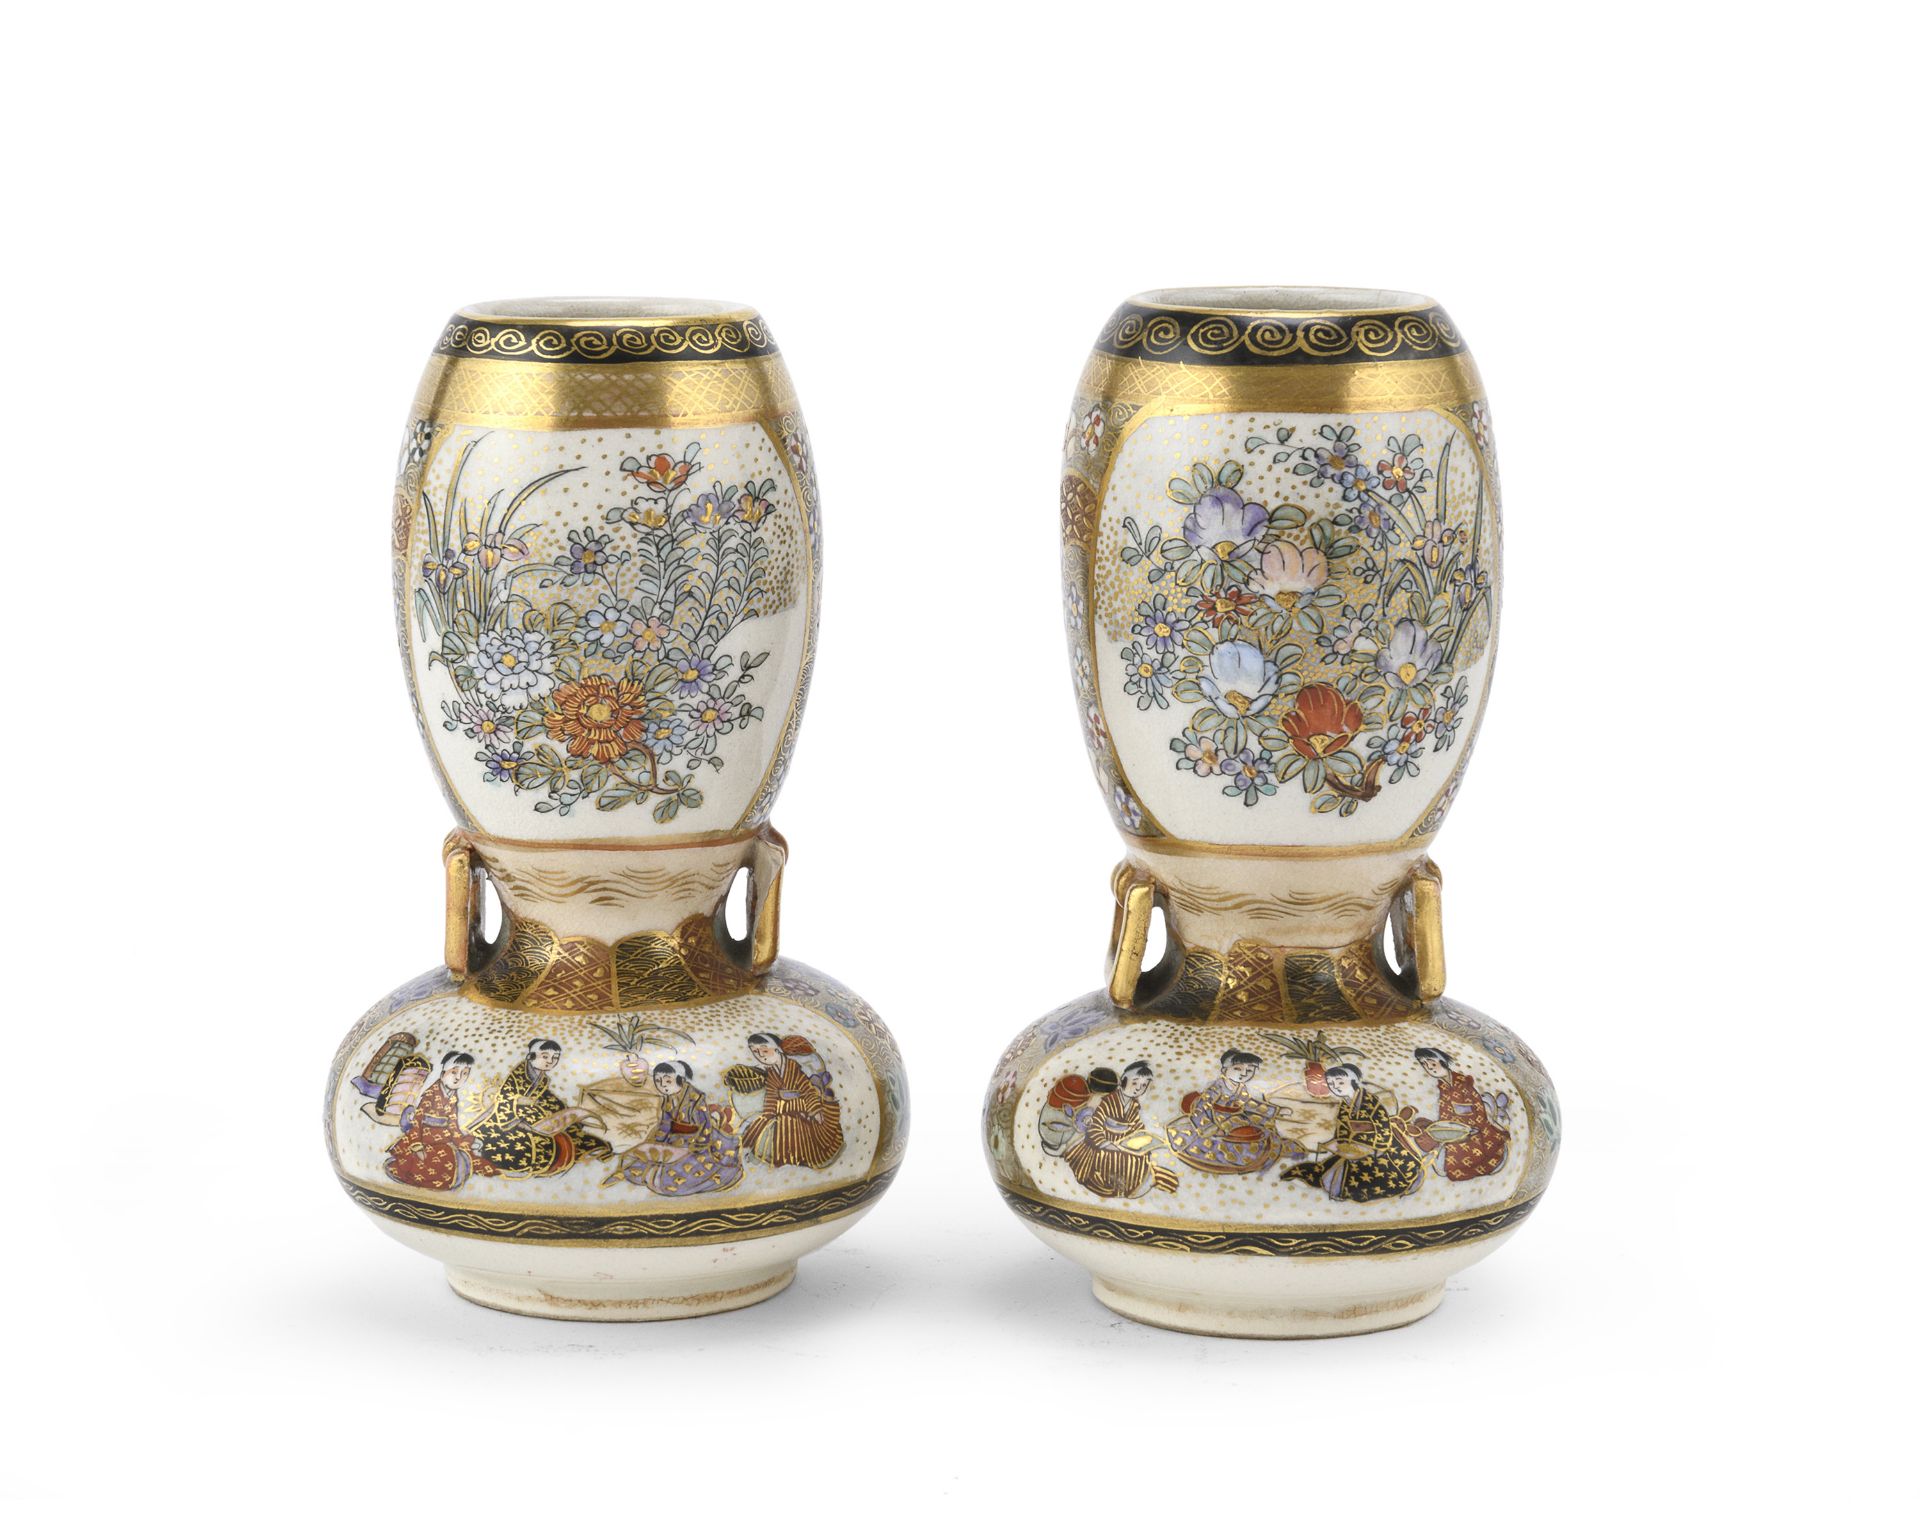 PAIR OF SMALL VASES IN CERAMIC WITH POLYCHROME ENAMELS AND GOLD JAPAN EARLY 20TH CENTURY